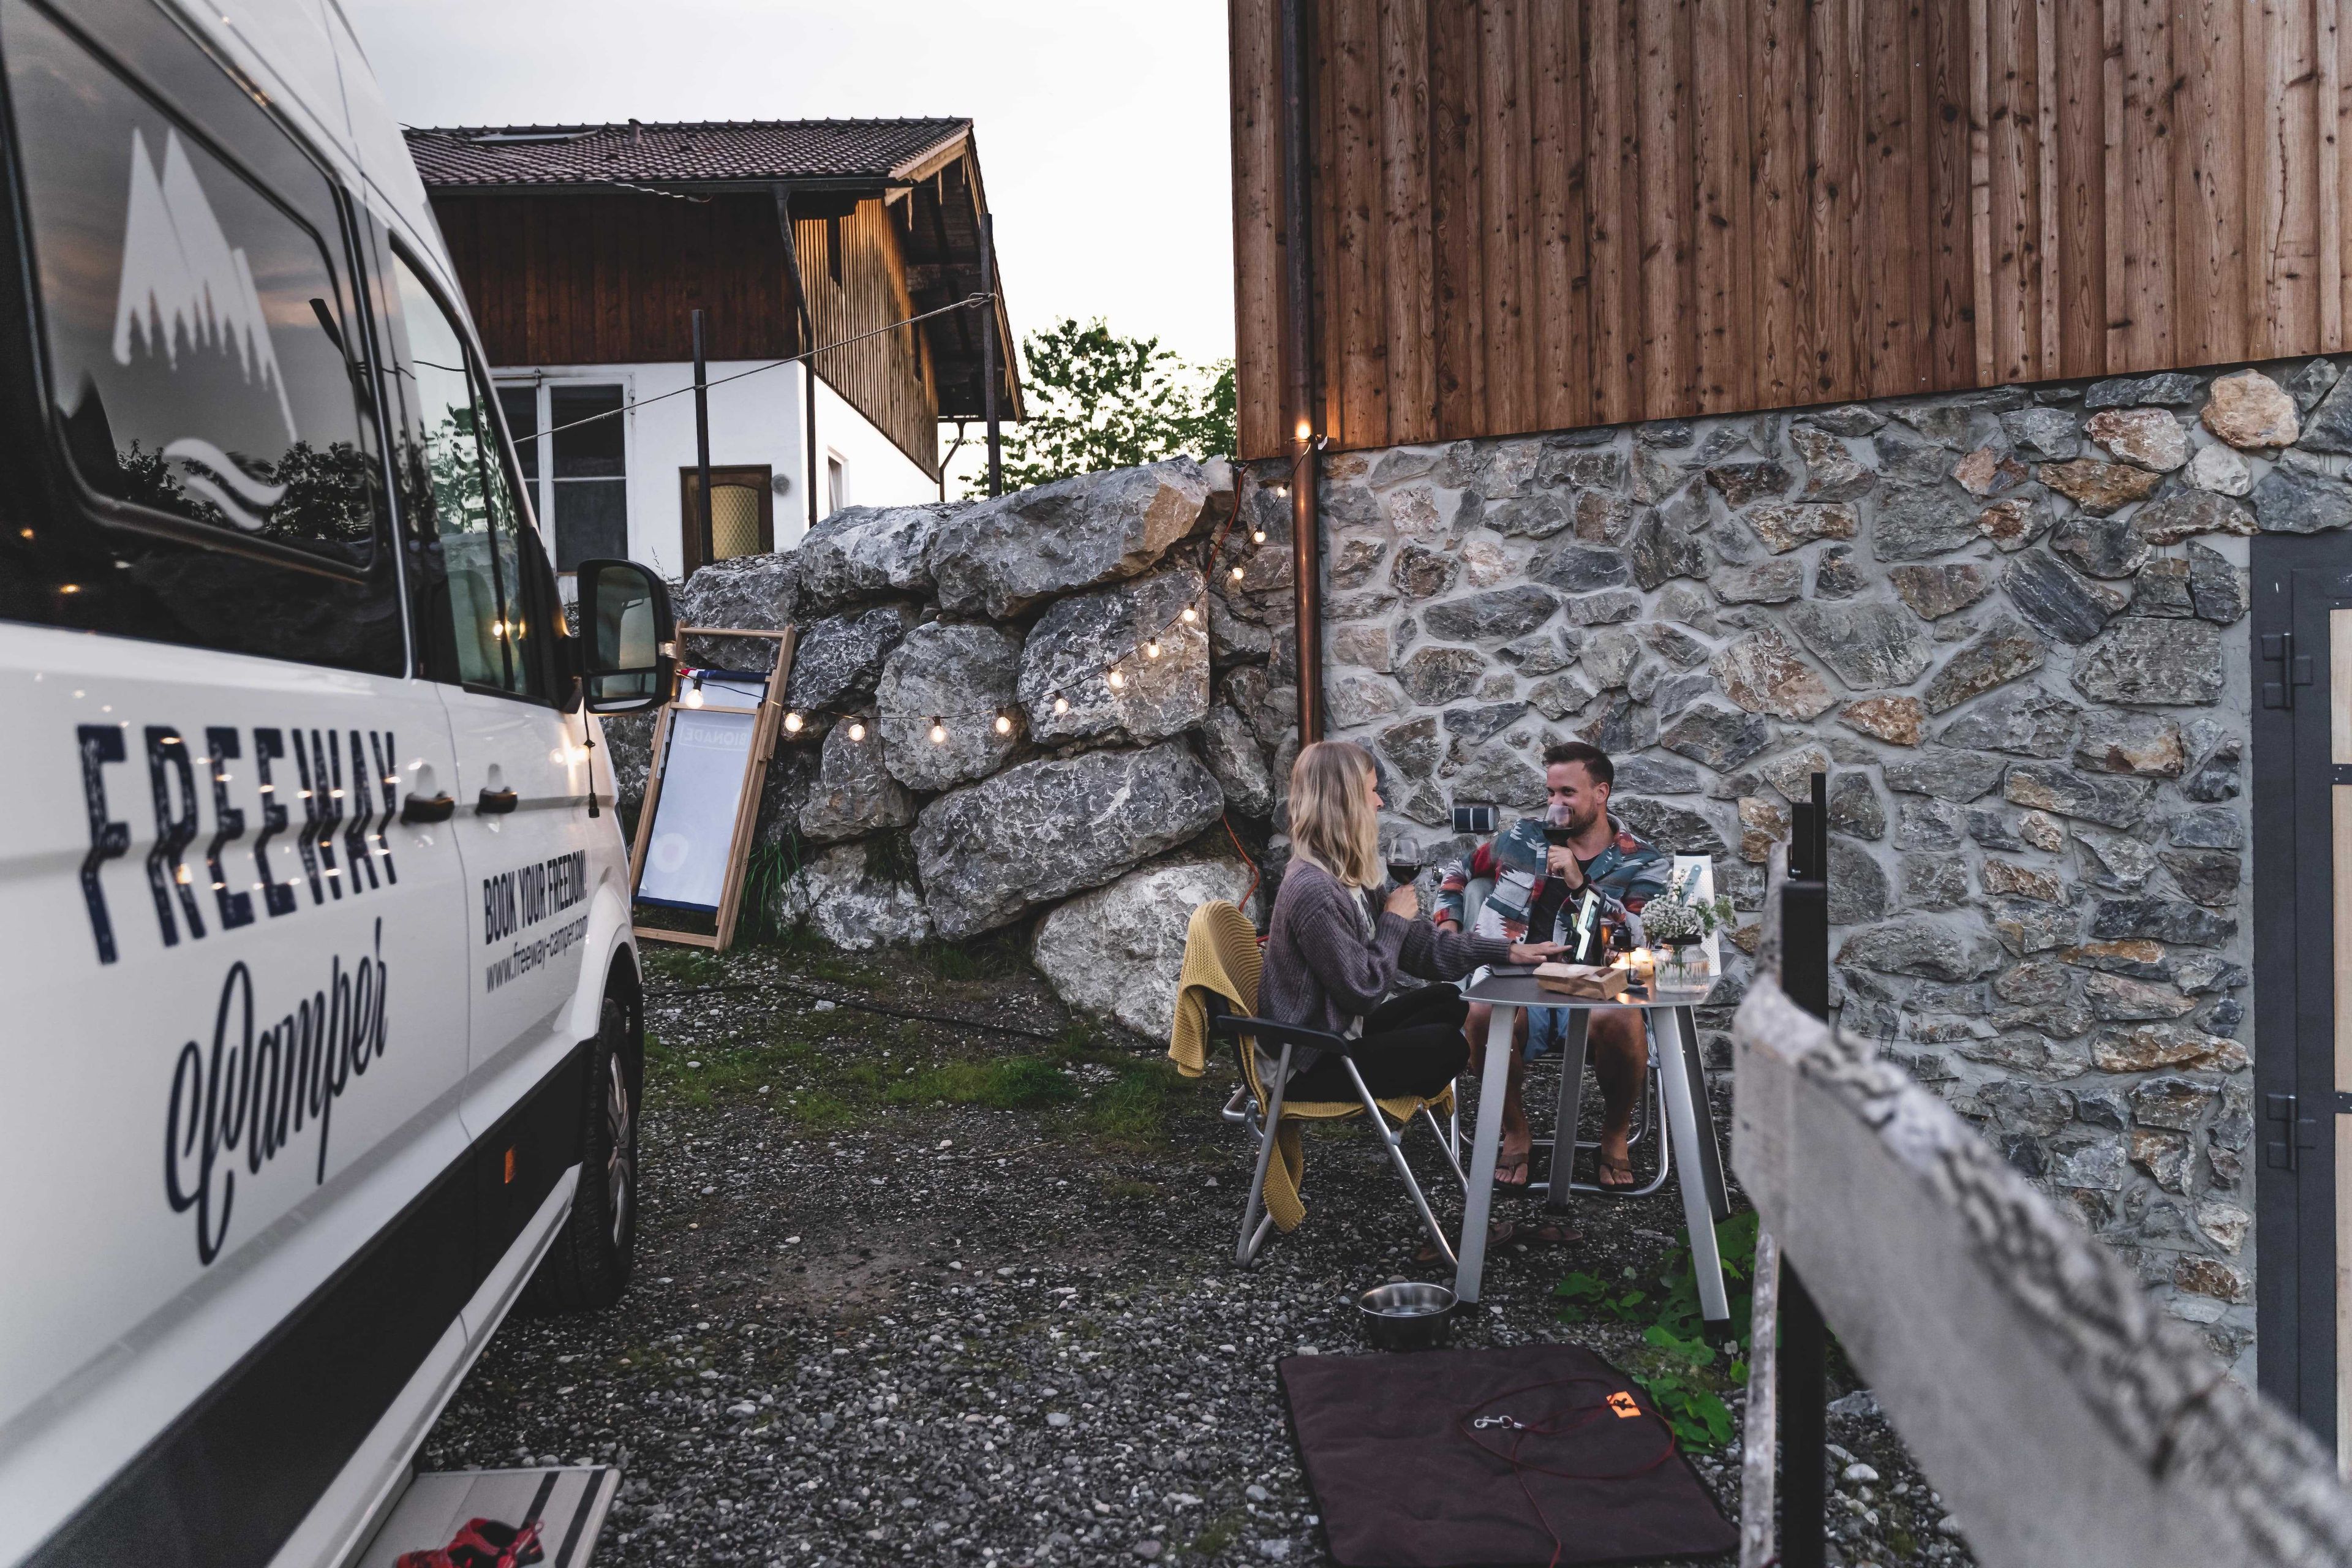 Couple sitting happily in front of white camper